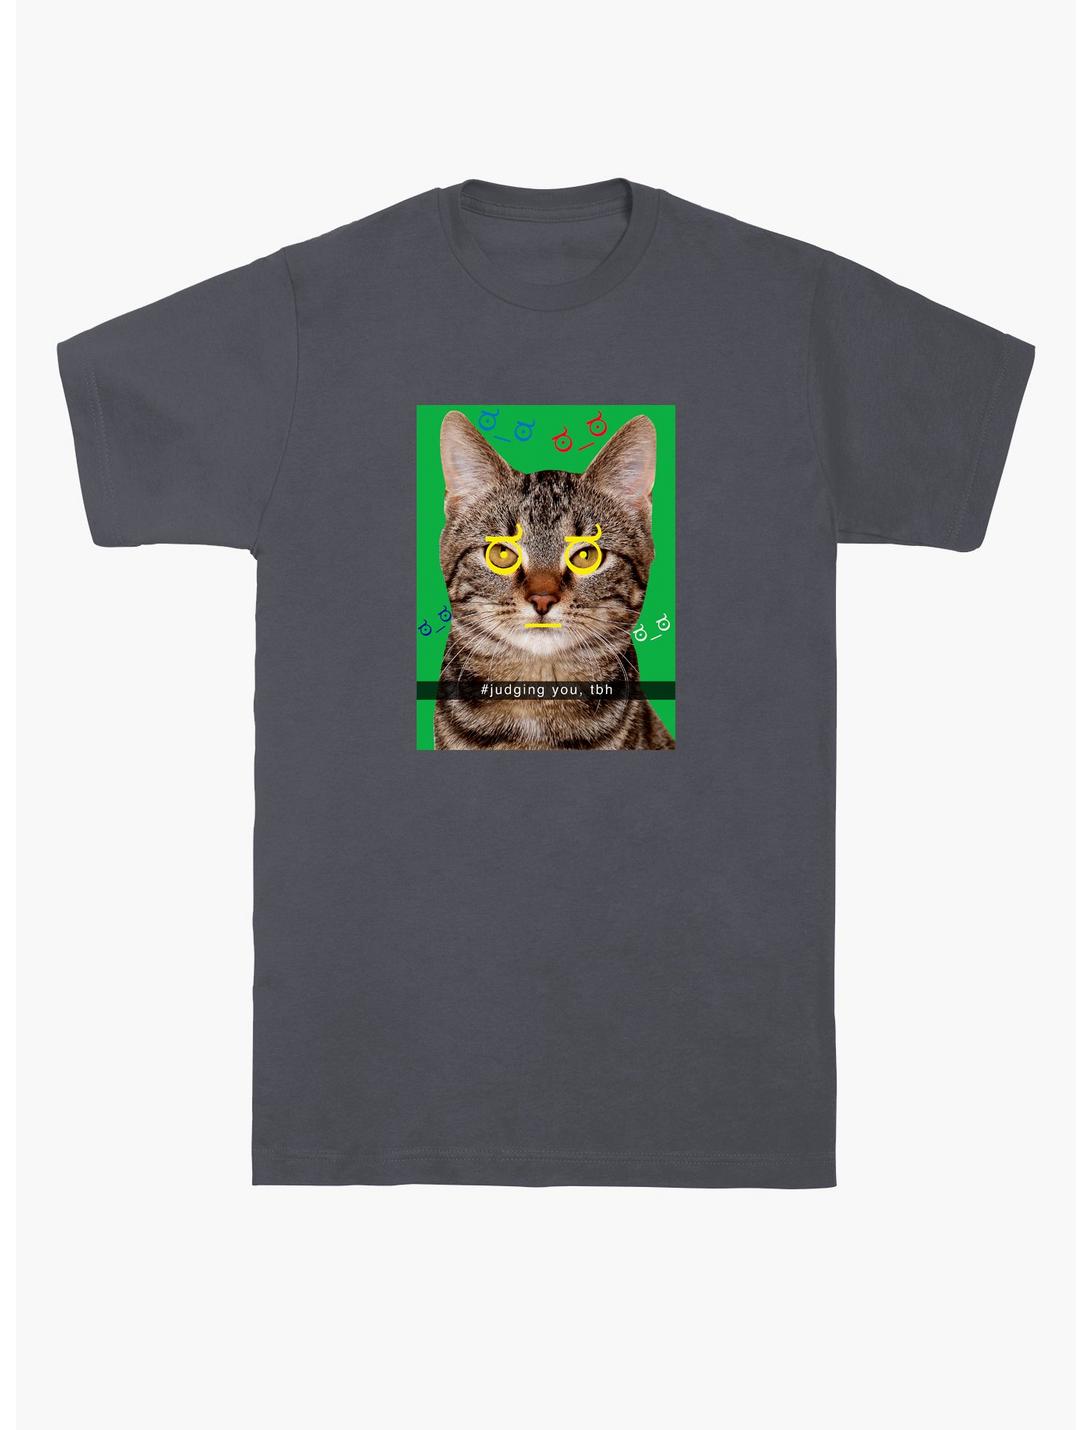 Judging You To Be Honest Cat T-Shirt, CHARCOAL HEATHER, hi-res